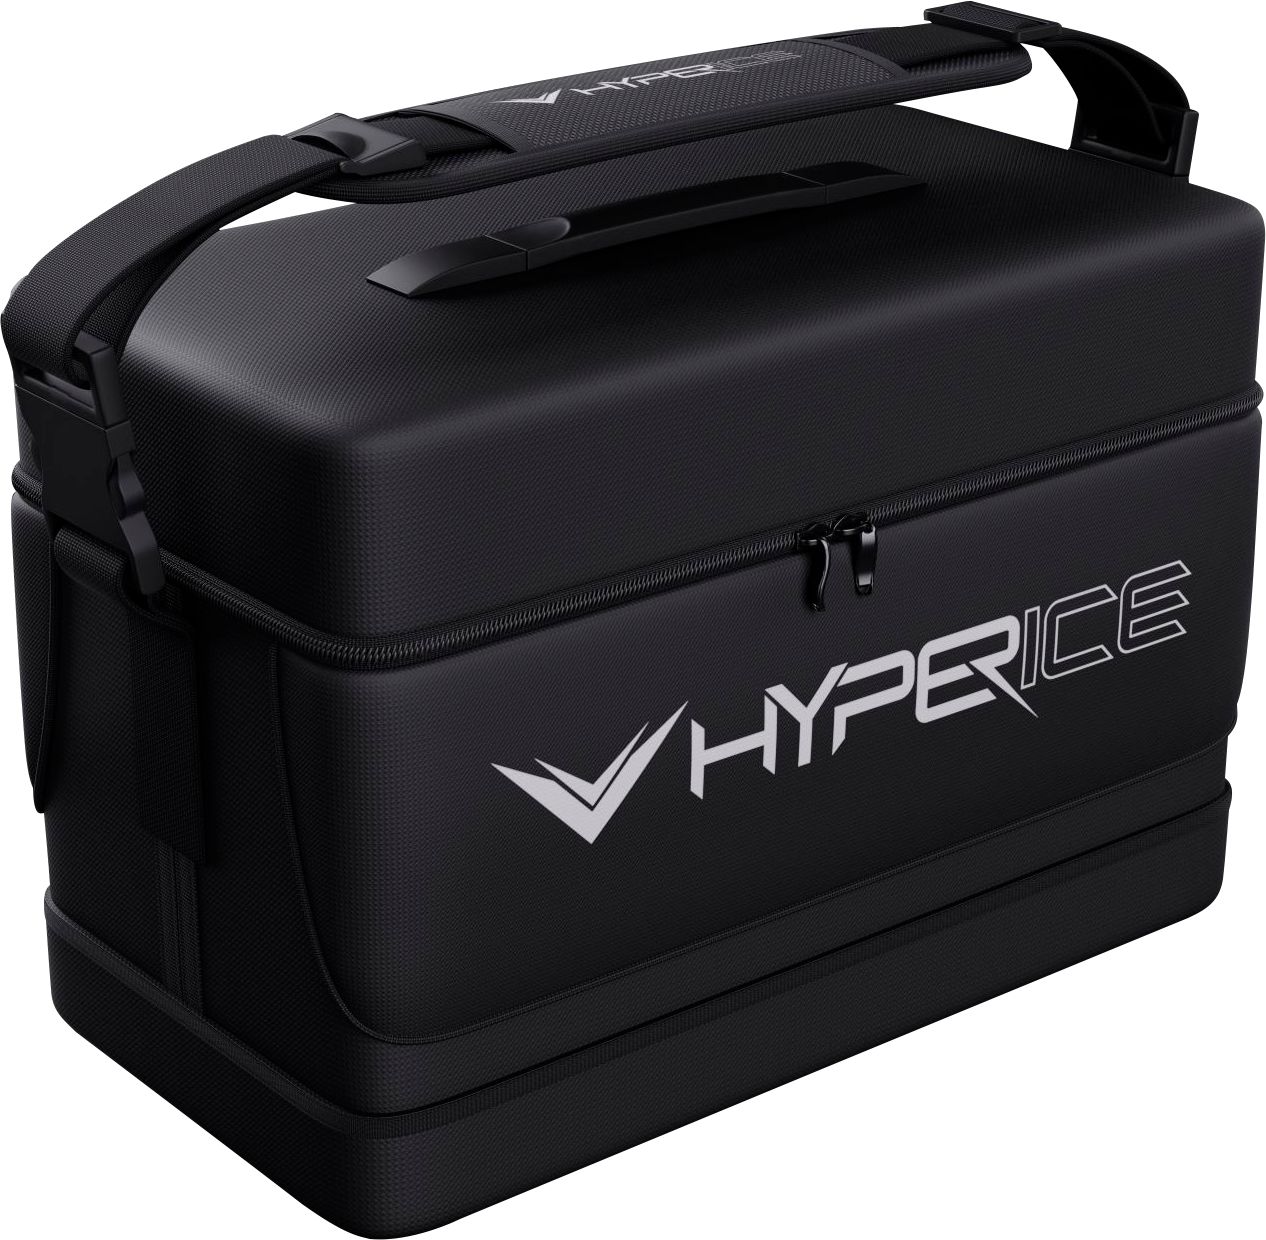 Angle View: Hyperice - Carry Case - Black